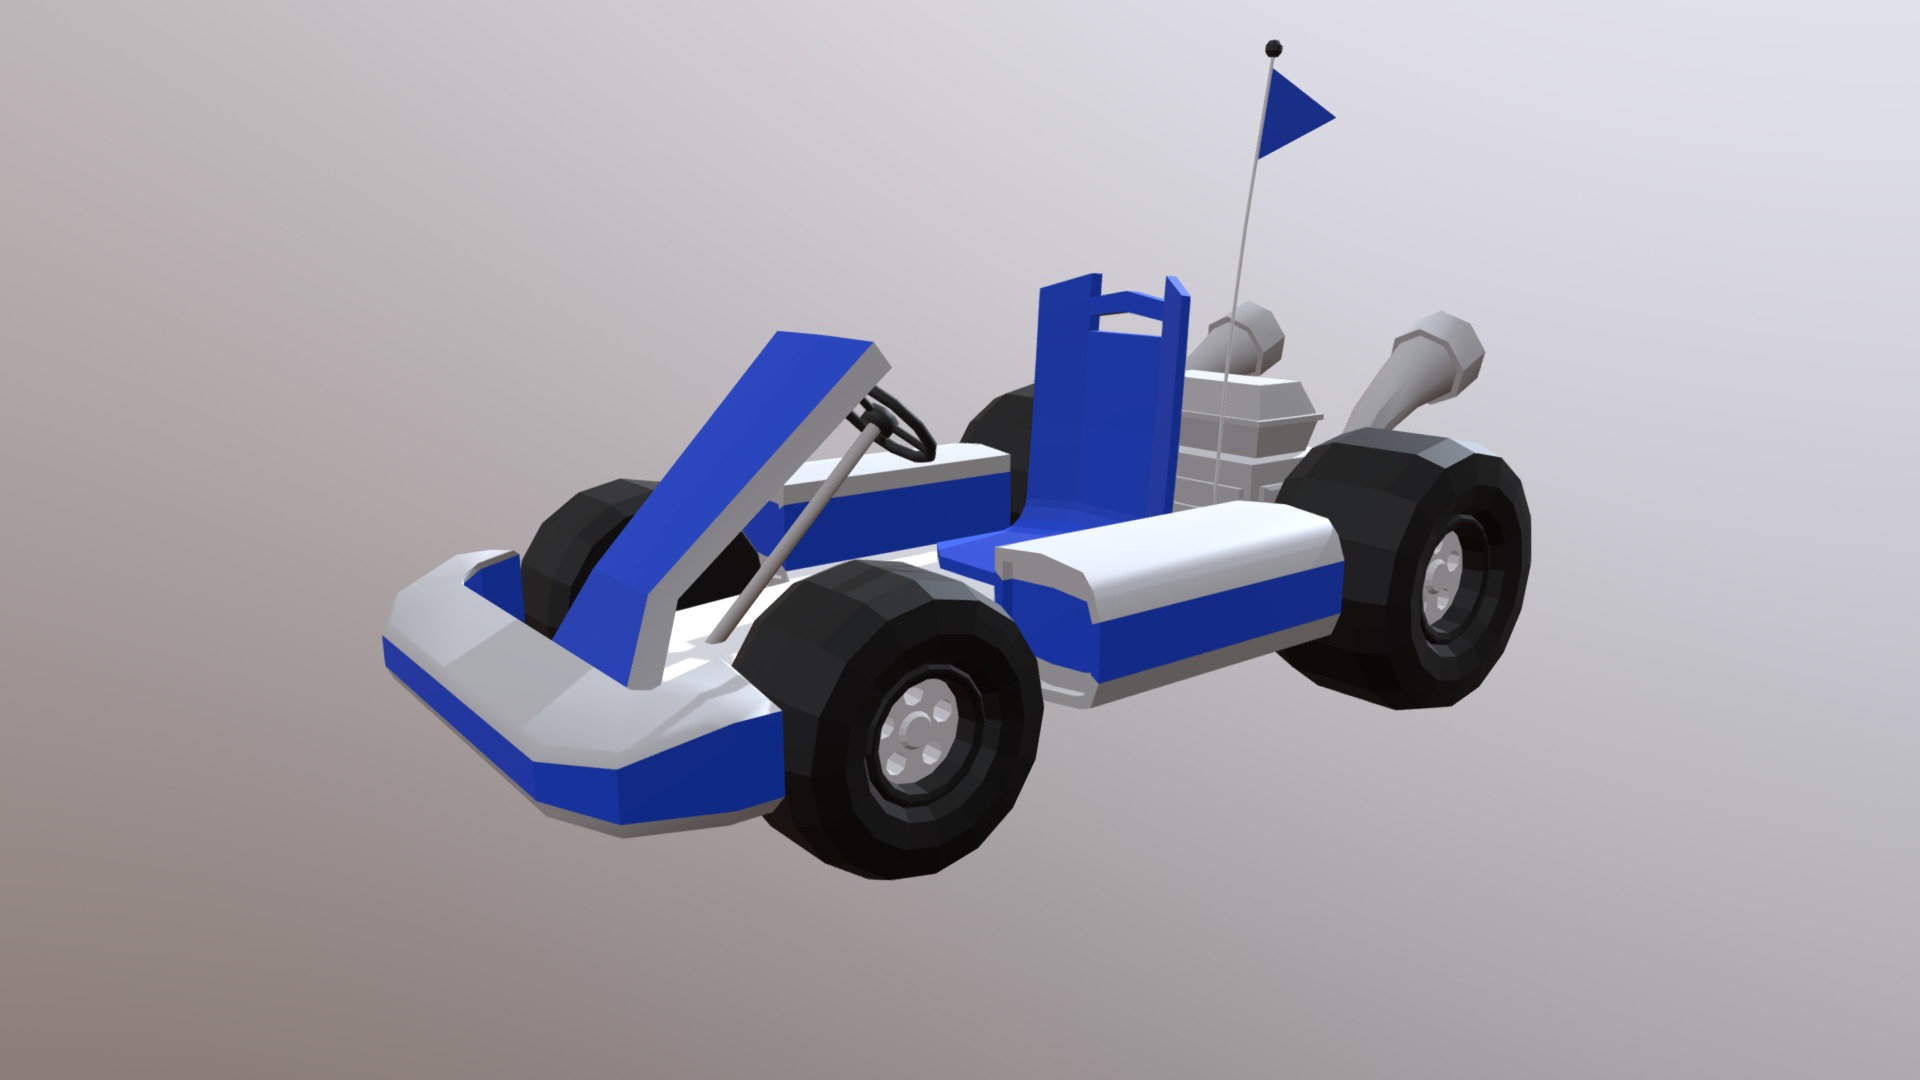 3D model Mini Kart 4 – Low Poly - This is a 3D model of the Mini Kart 4 - Low Poly. The 3D model is about a blue and white toy car.